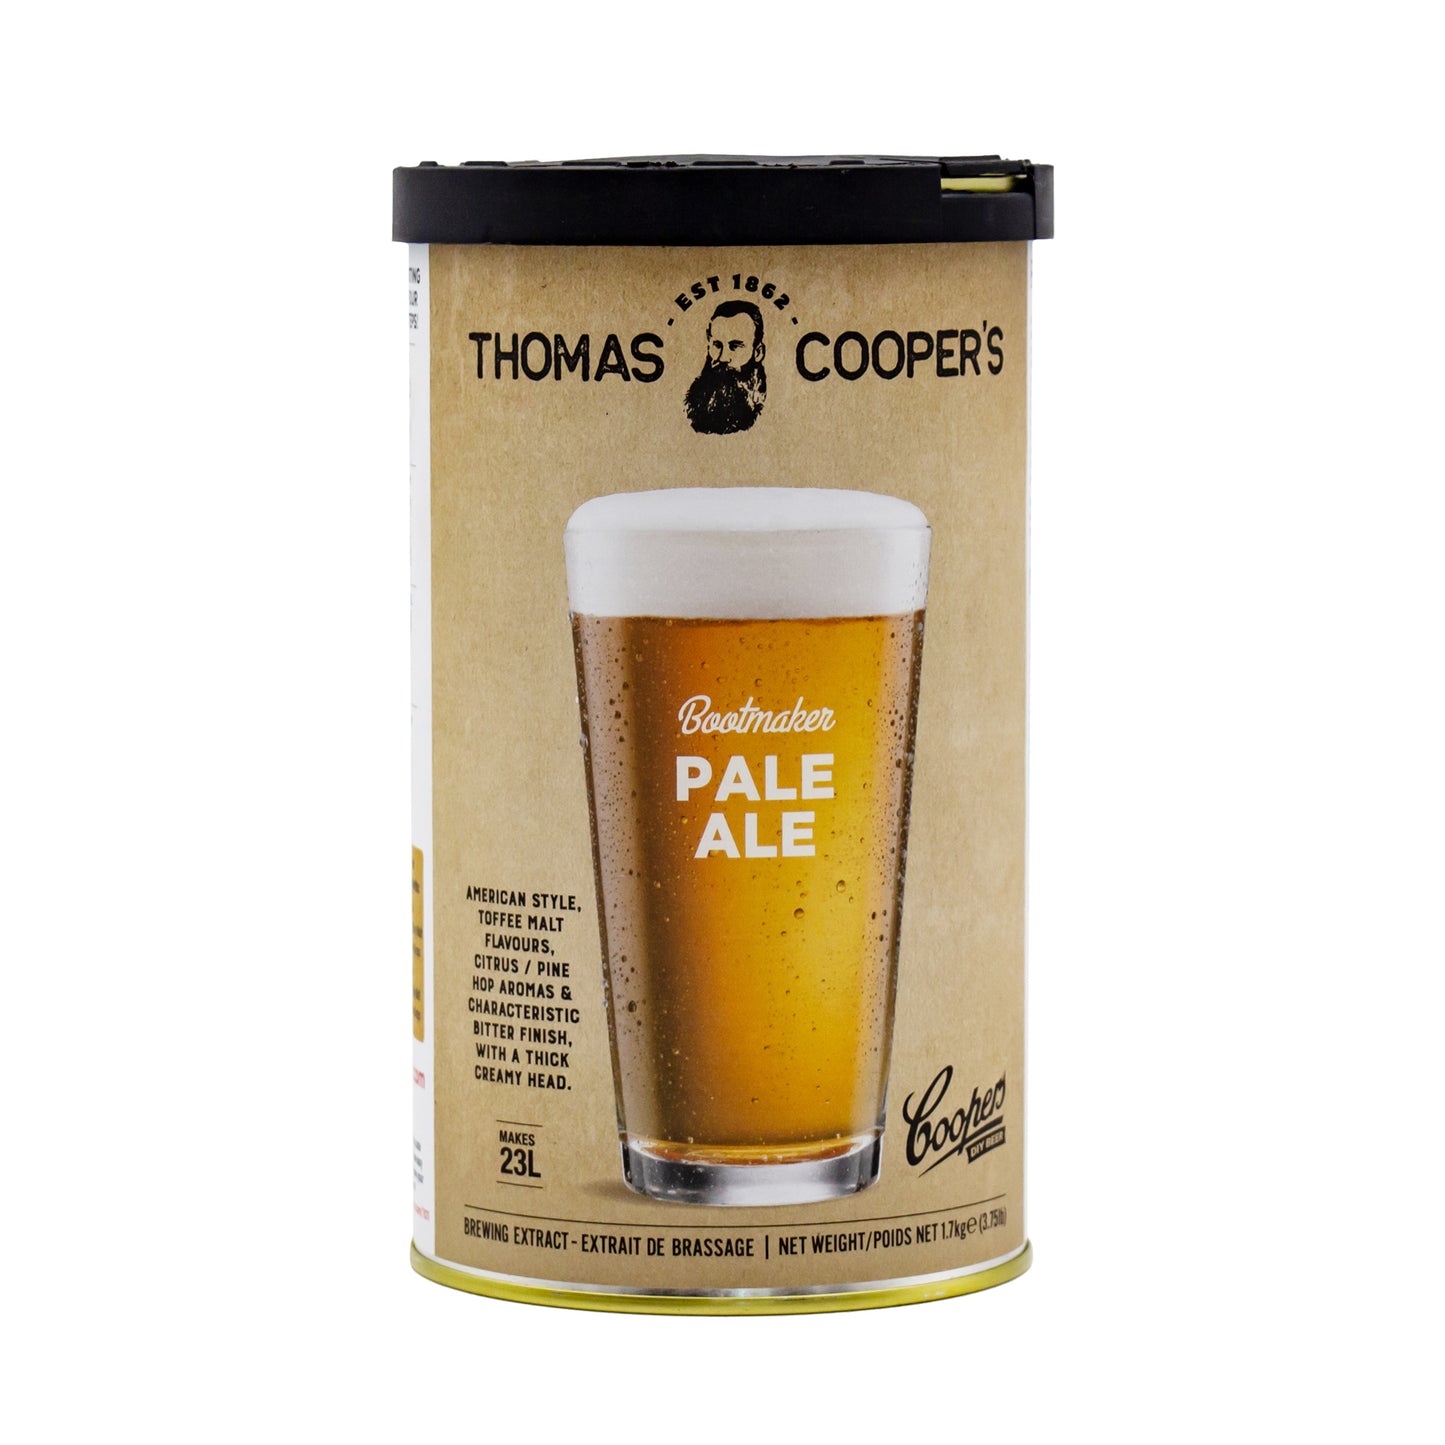 Coopers bootmakers pale ale beer tin